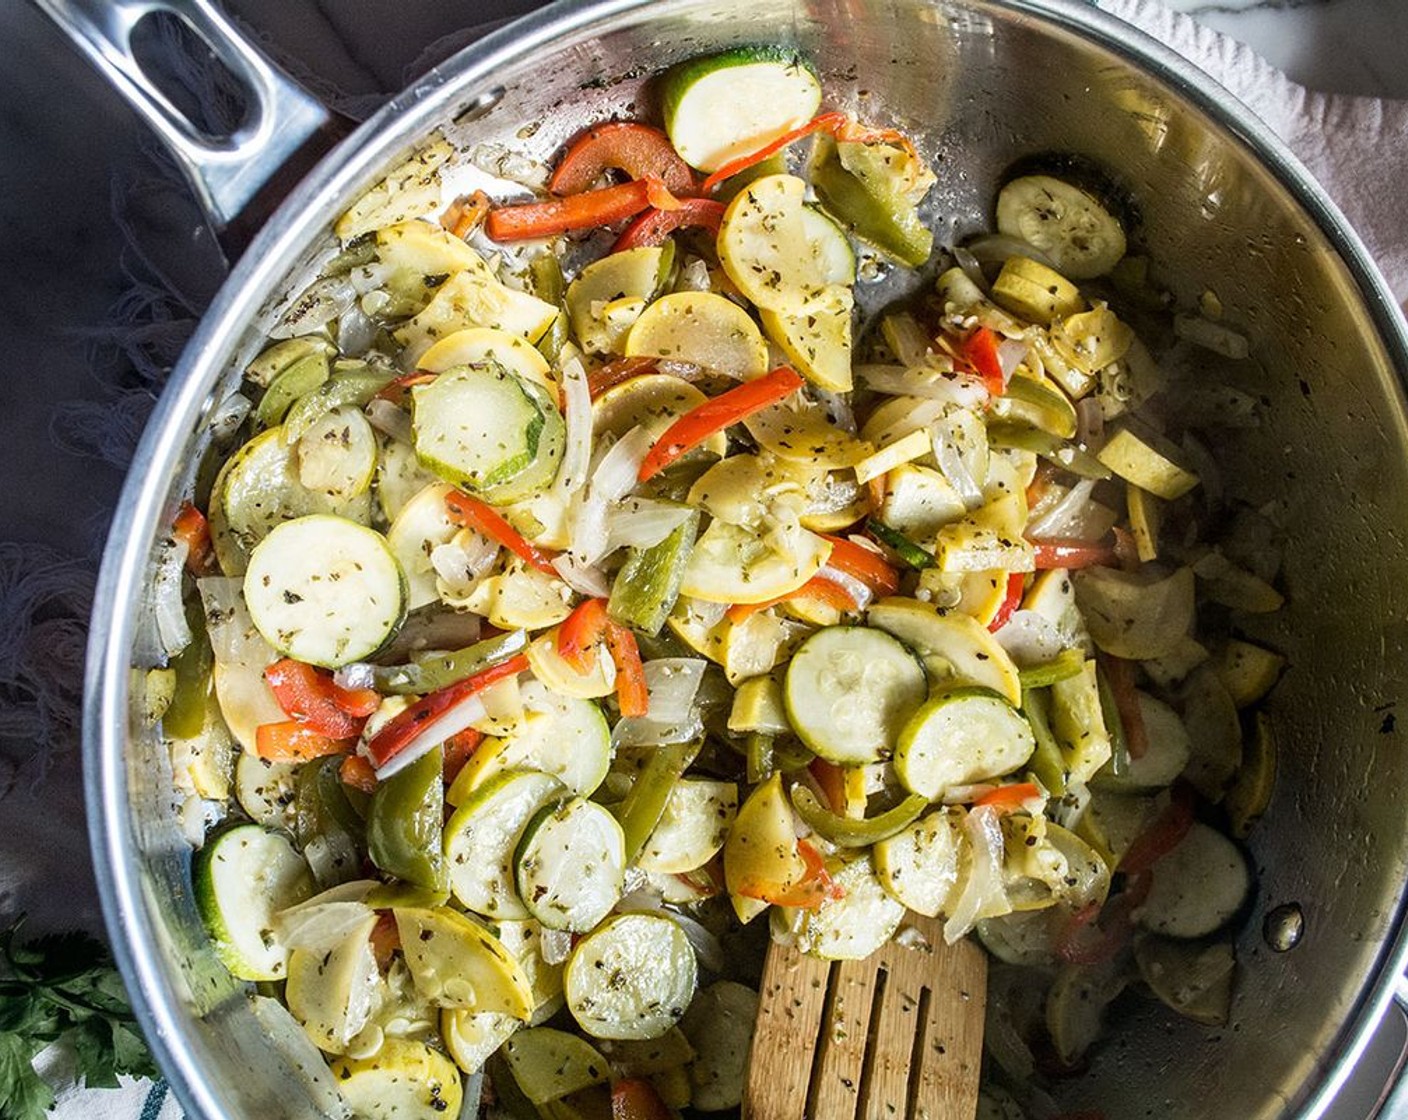 step 3 Add Carrot (1/2 cup), Green Bell Pepper (1/2), Red Bell Pepper (1/2), Yellow Squash (1), Zucchini (1), and Sweet Onion (1) to a large skillet, pour dressing over veggies and stir to coat. Cook over medium heat for 10-12 minutes or until vegetables are tender and cooked to your preference.